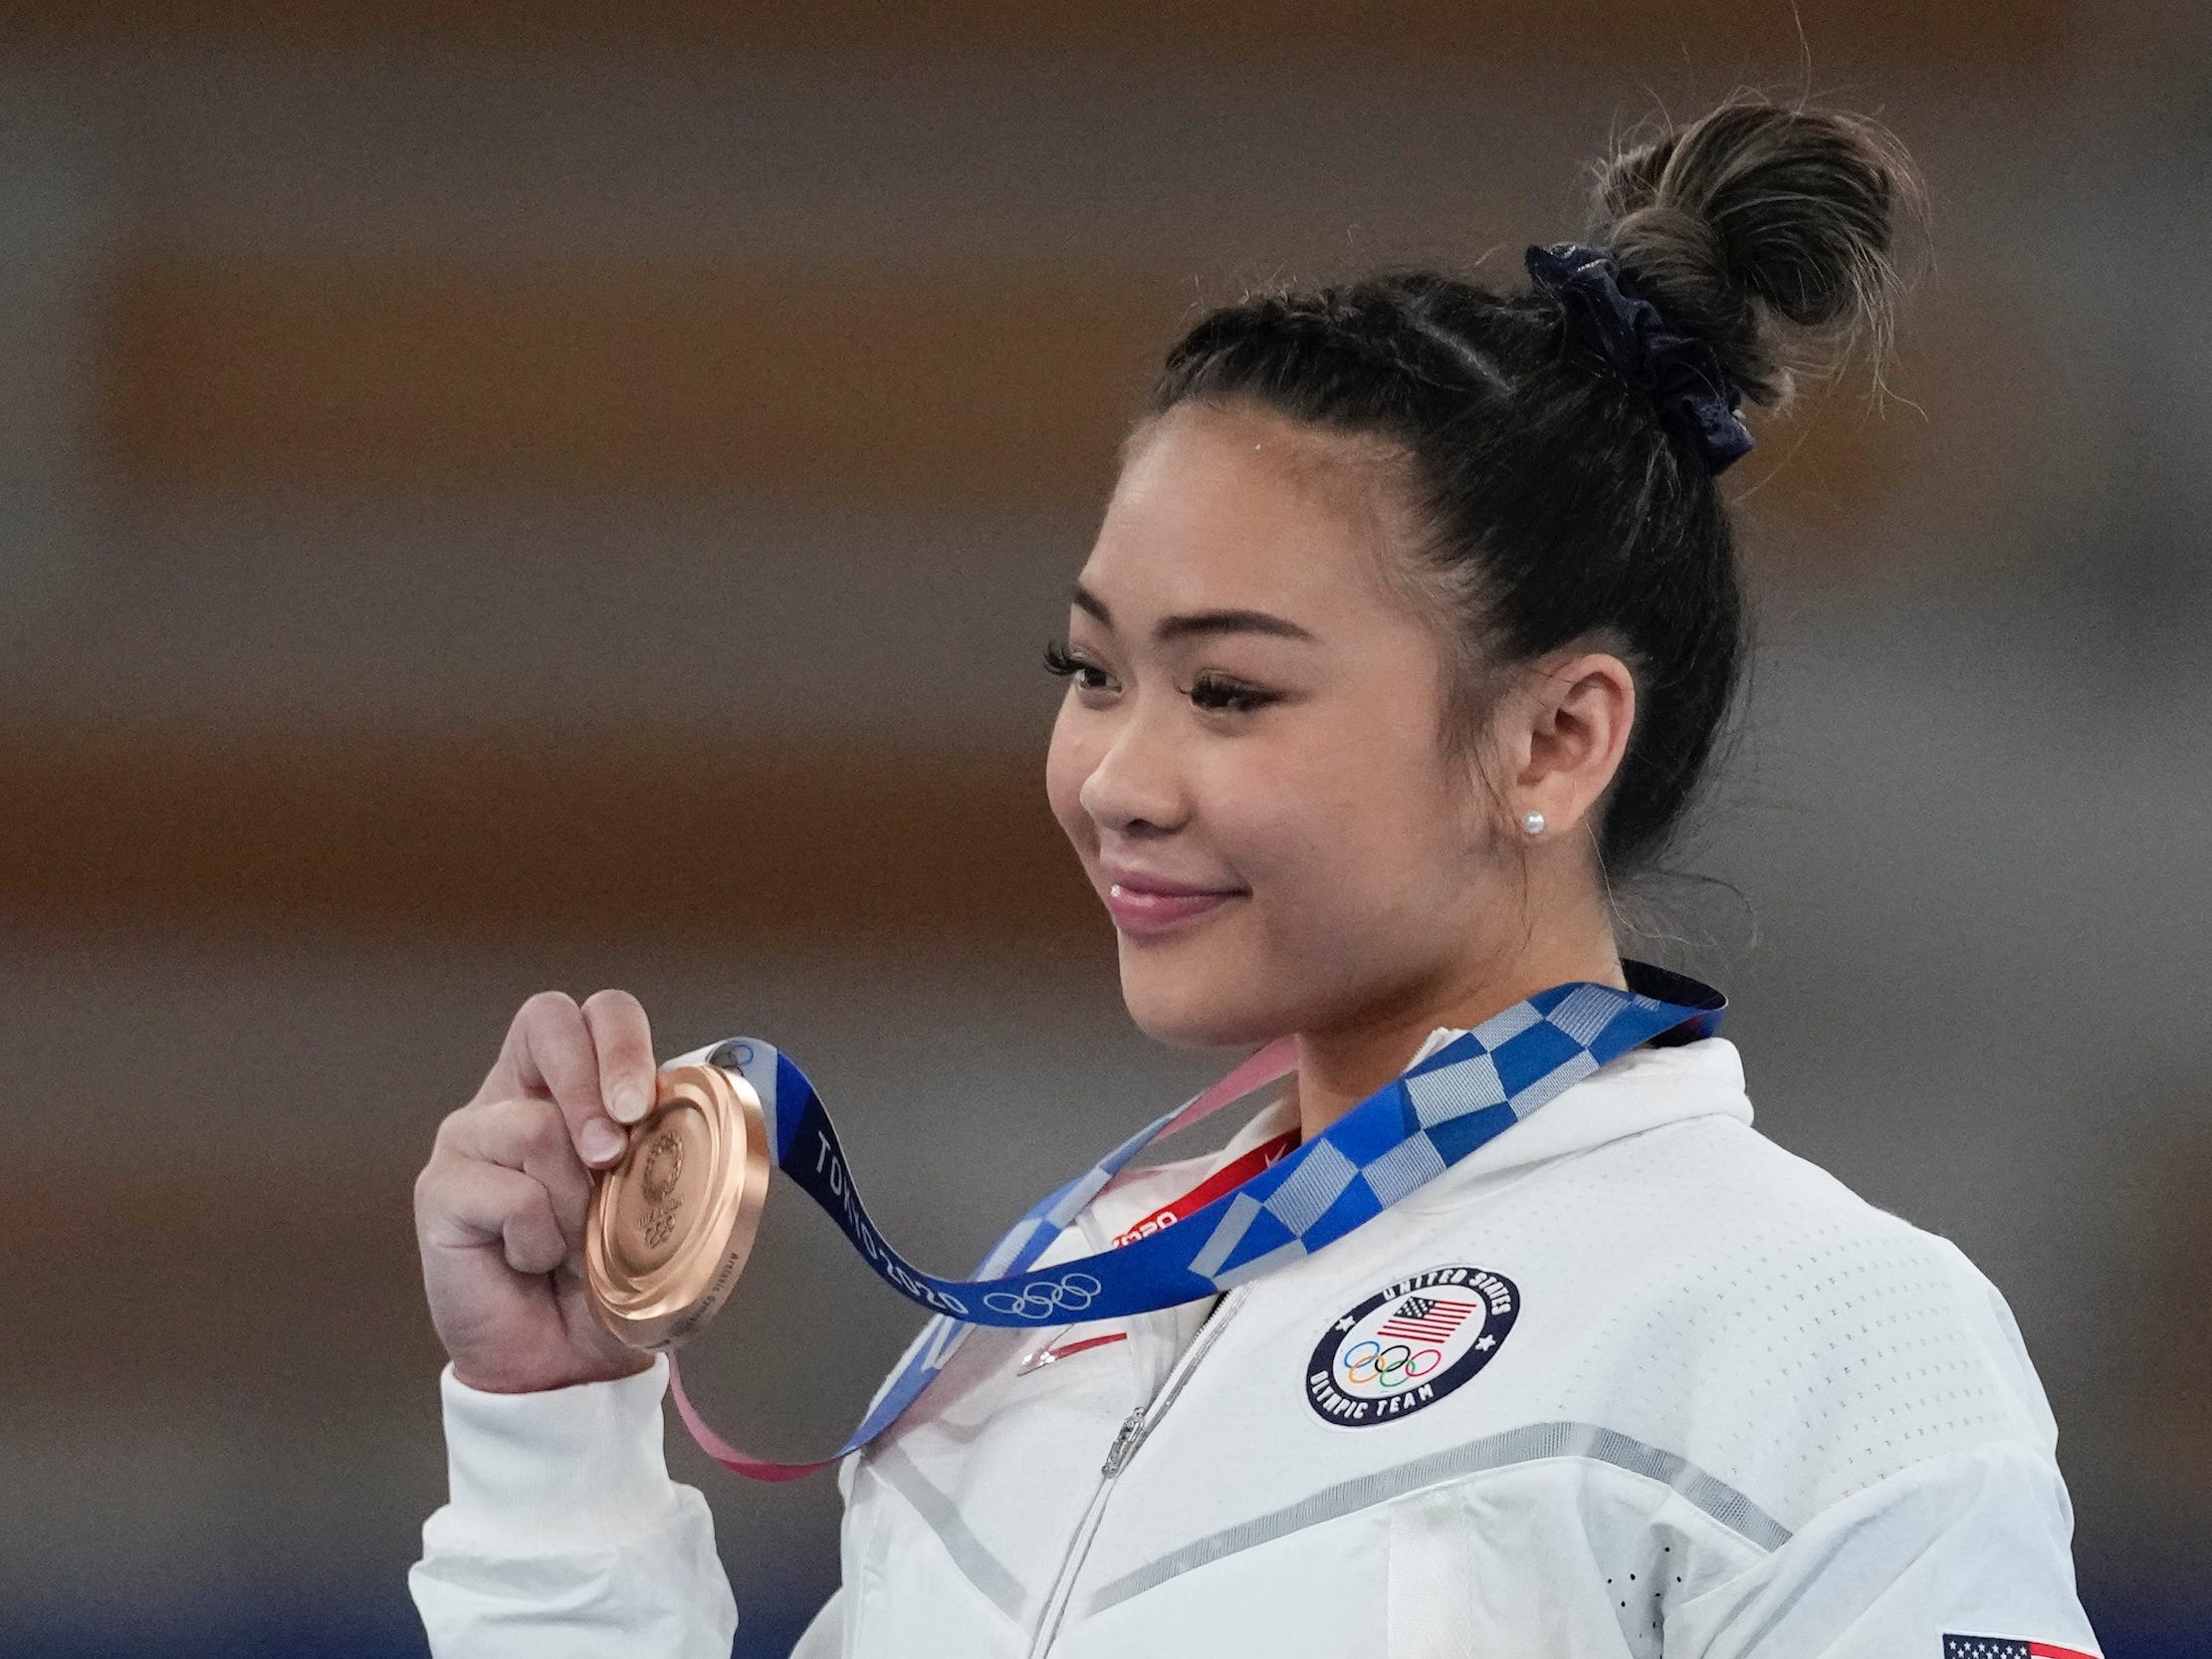 Suni Lee failed to win gold on the uneven bars and blamed the 'mess up